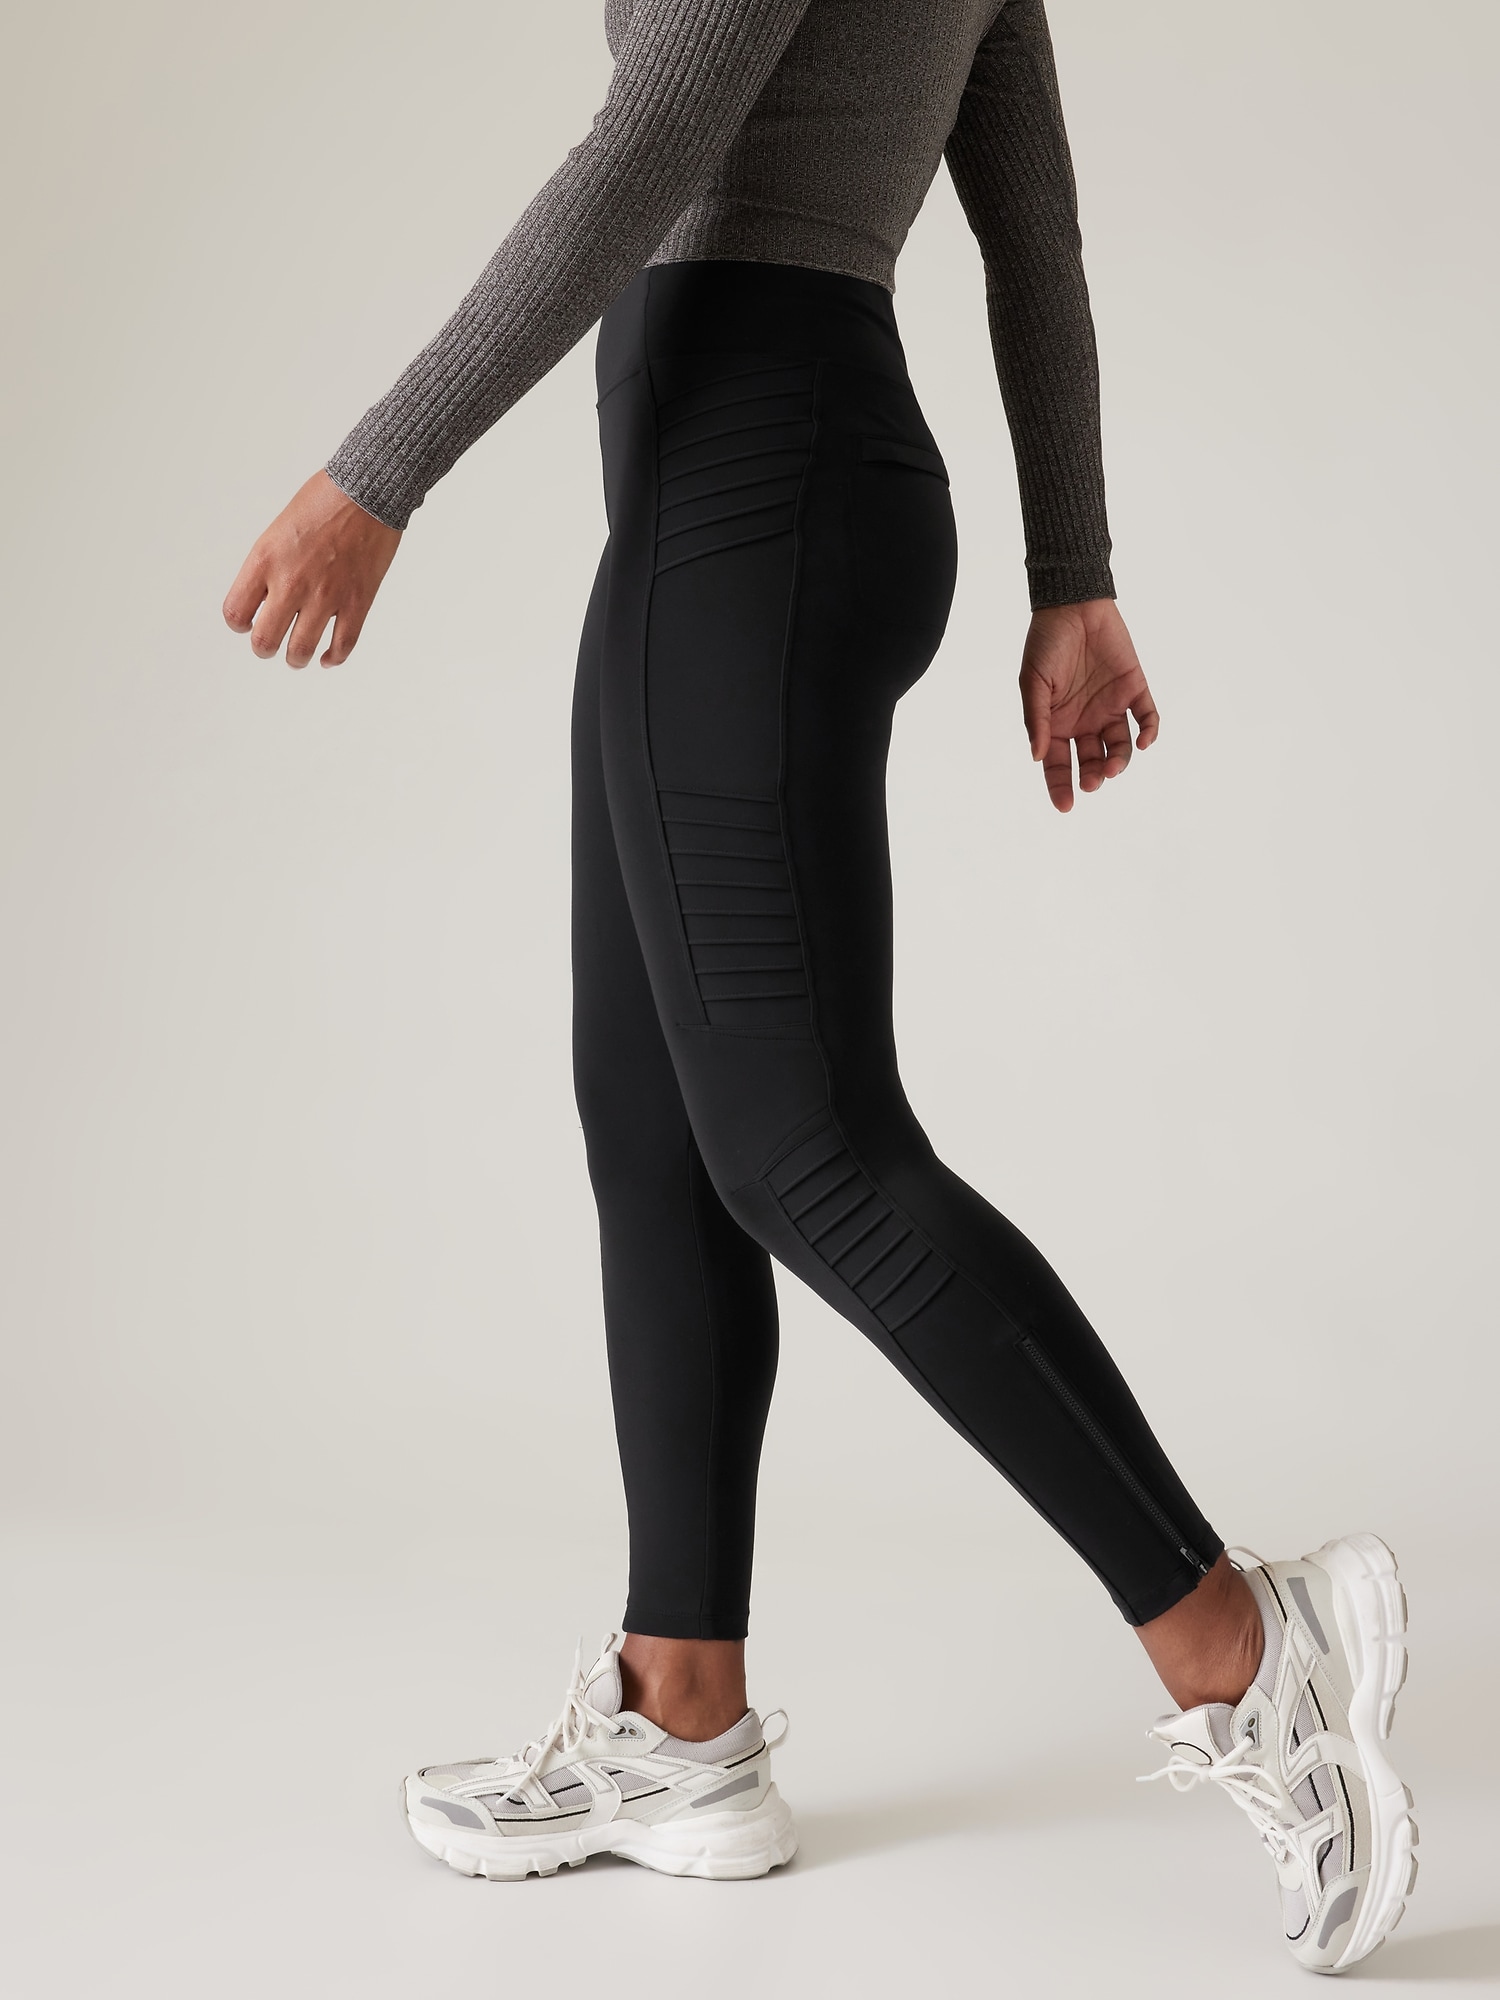 Athleta Delancey Moto Tight in Coffee House Small - $50 - From Laura